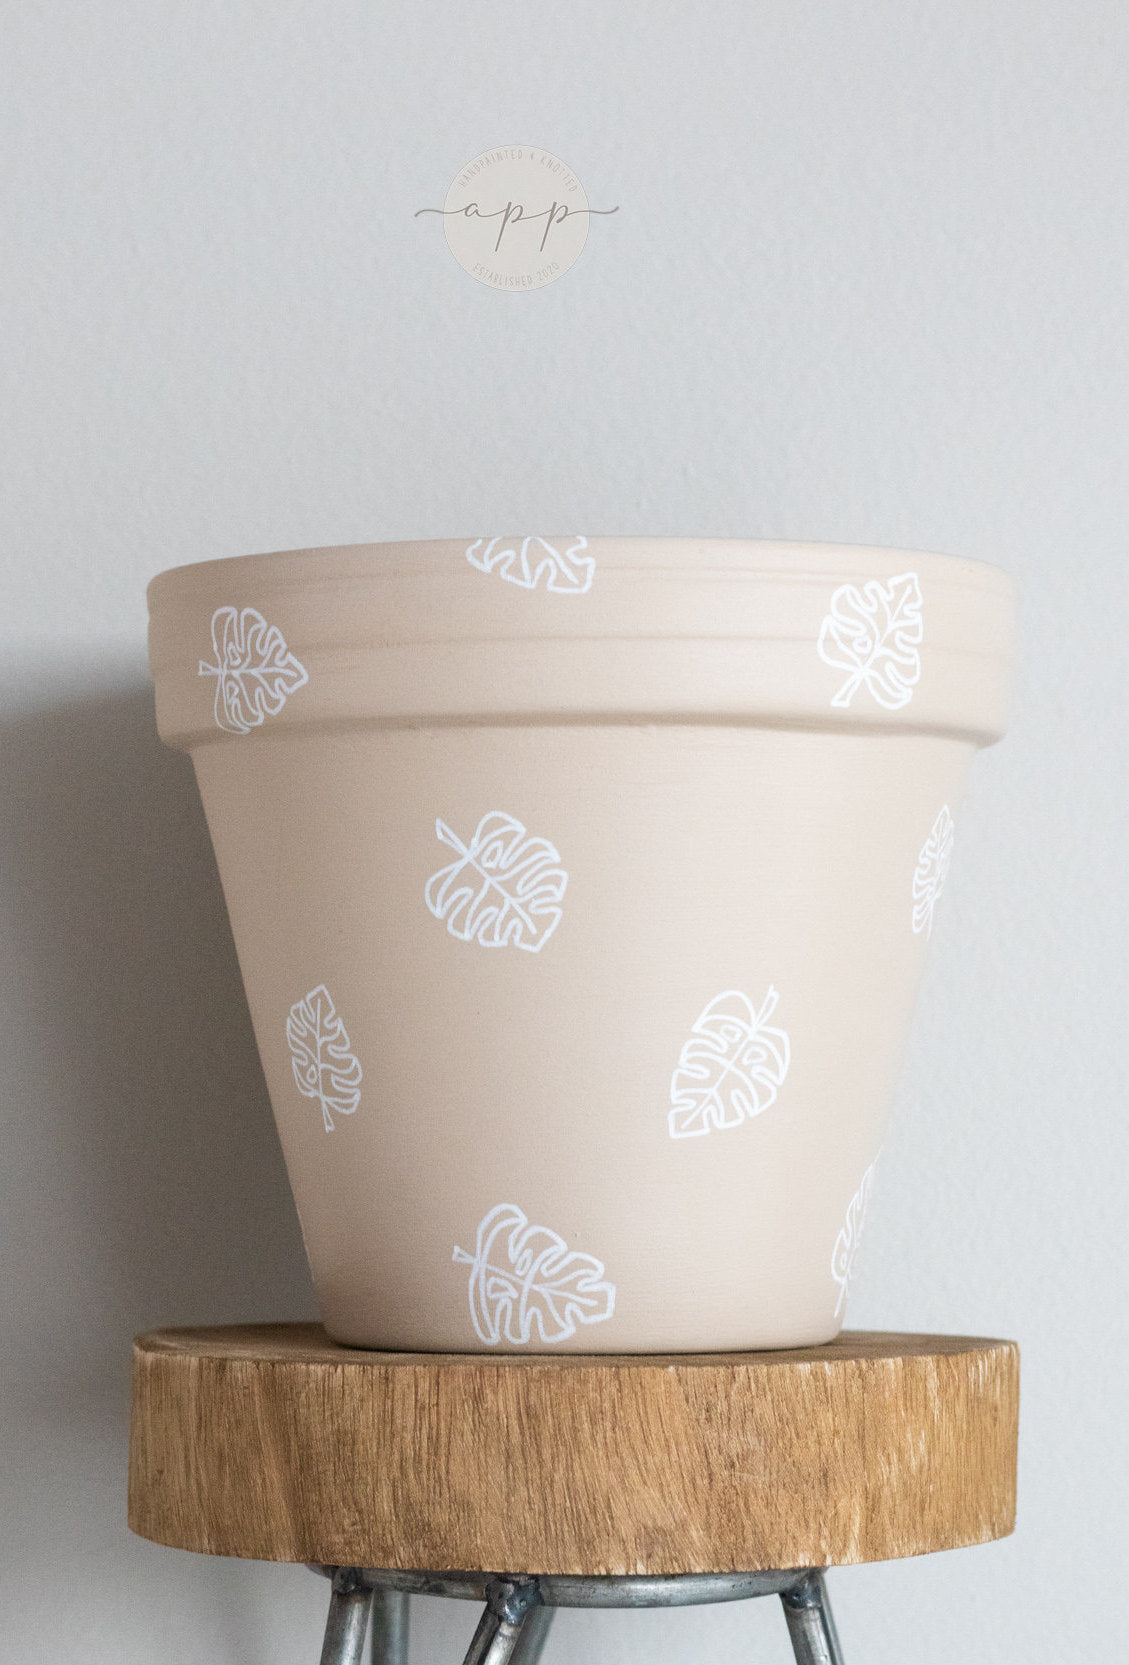 Light Beige Monstera Leaf Pot | Hand Painted Terracotta Pot with Drainage Hole | Saucers available only for tapered pots